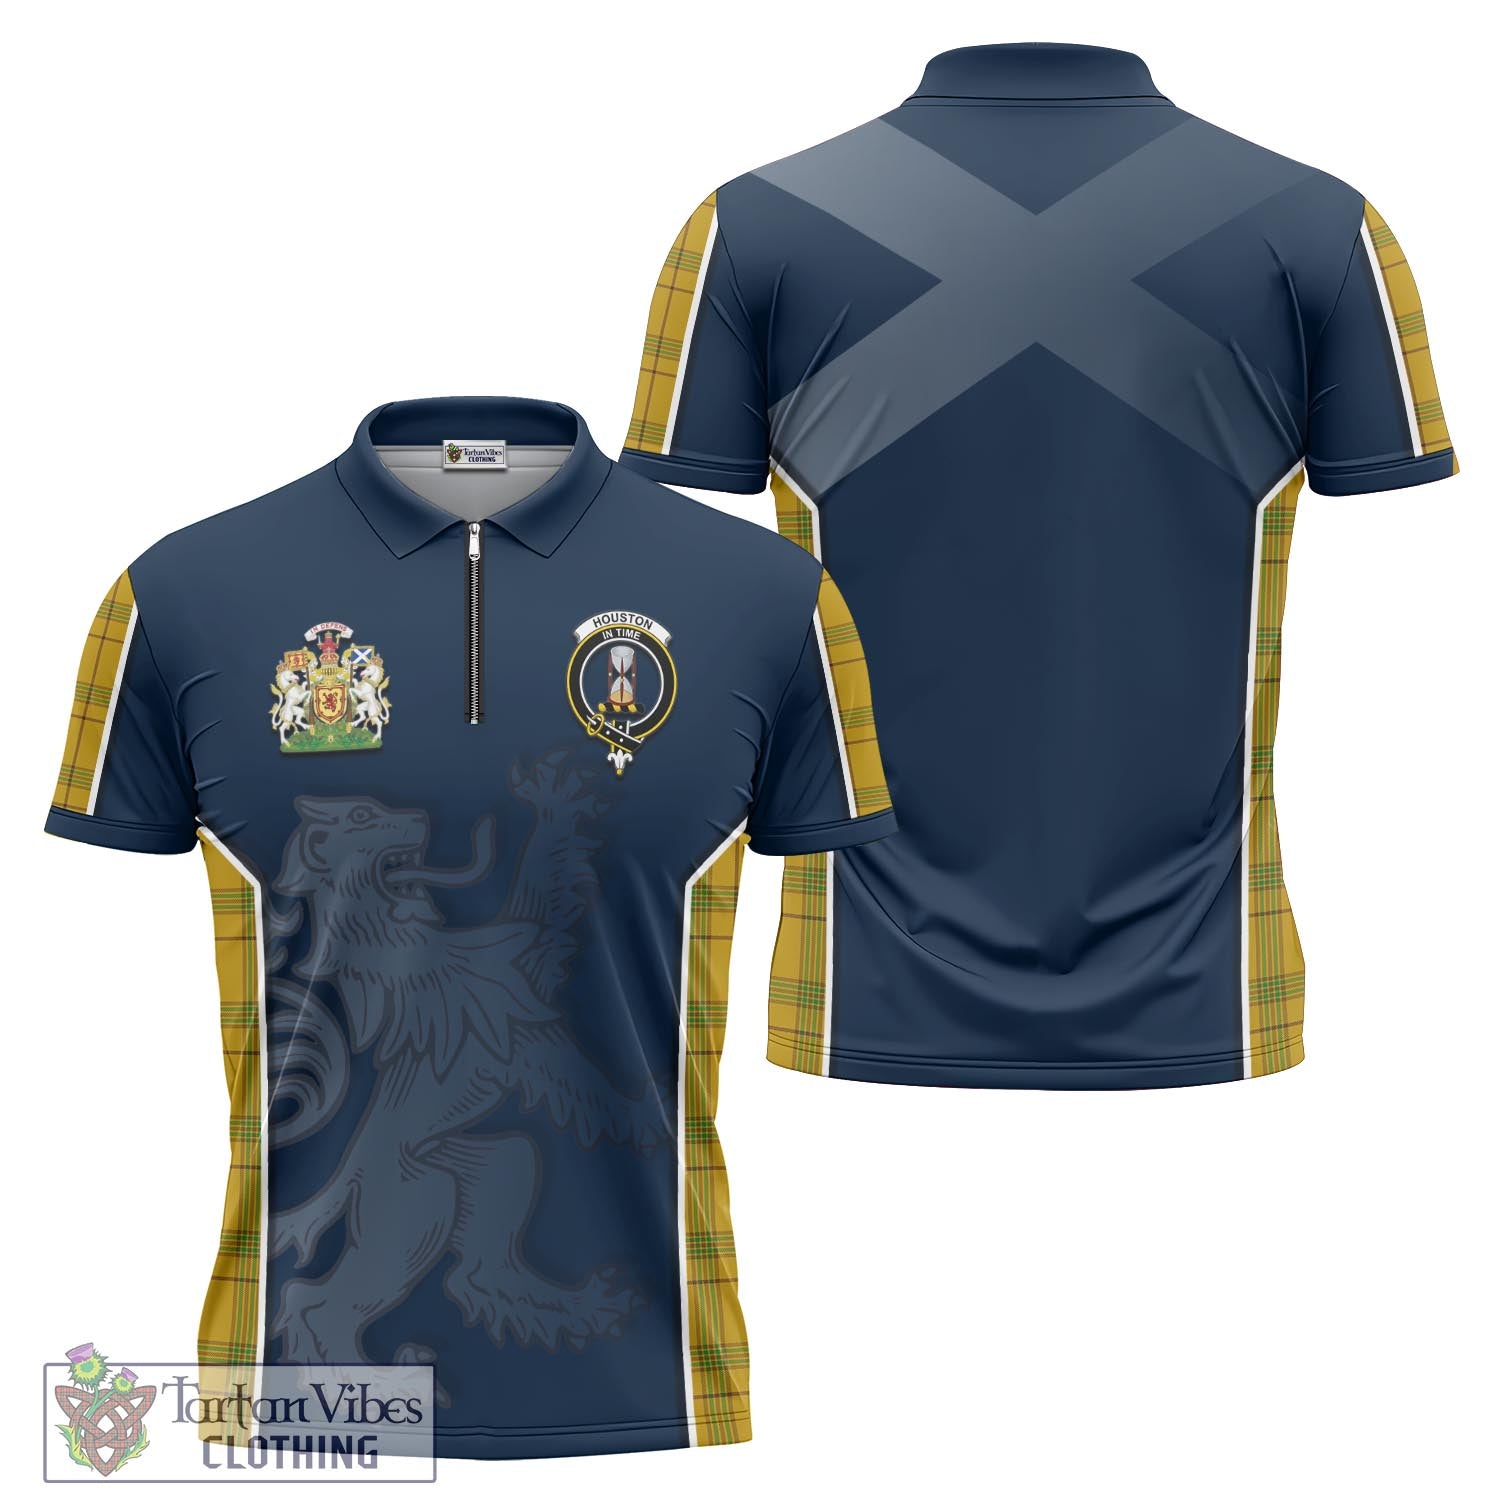 Tartan Vibes Clothing Houston Tartan Zipper Polo Shirt with Family Crest and Lion Rampant Vibes Sport Style